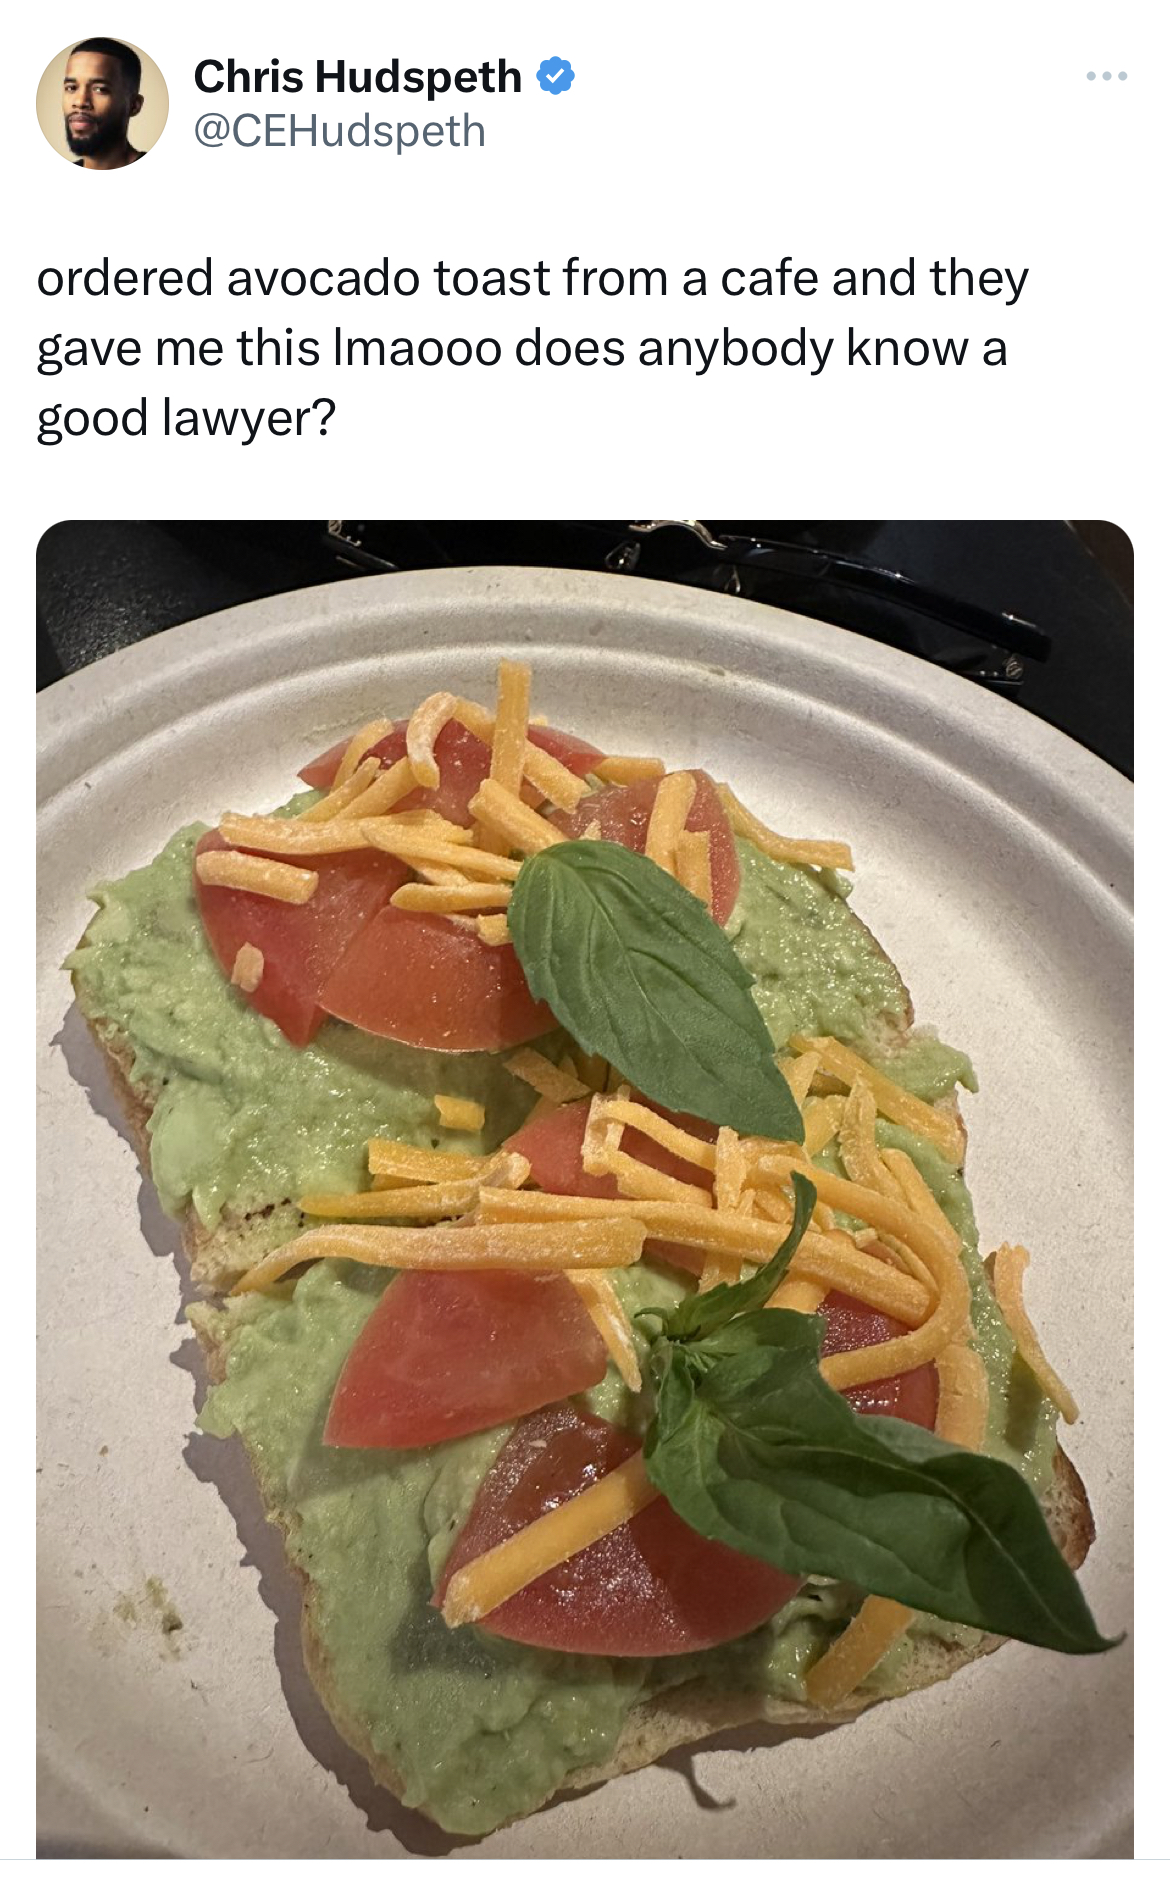 savage and absurd tweets - dish - Chris Hudspeth ordered avocado toast from a cafe and they gave me this Imaooo does anybody know a good lawyer? www